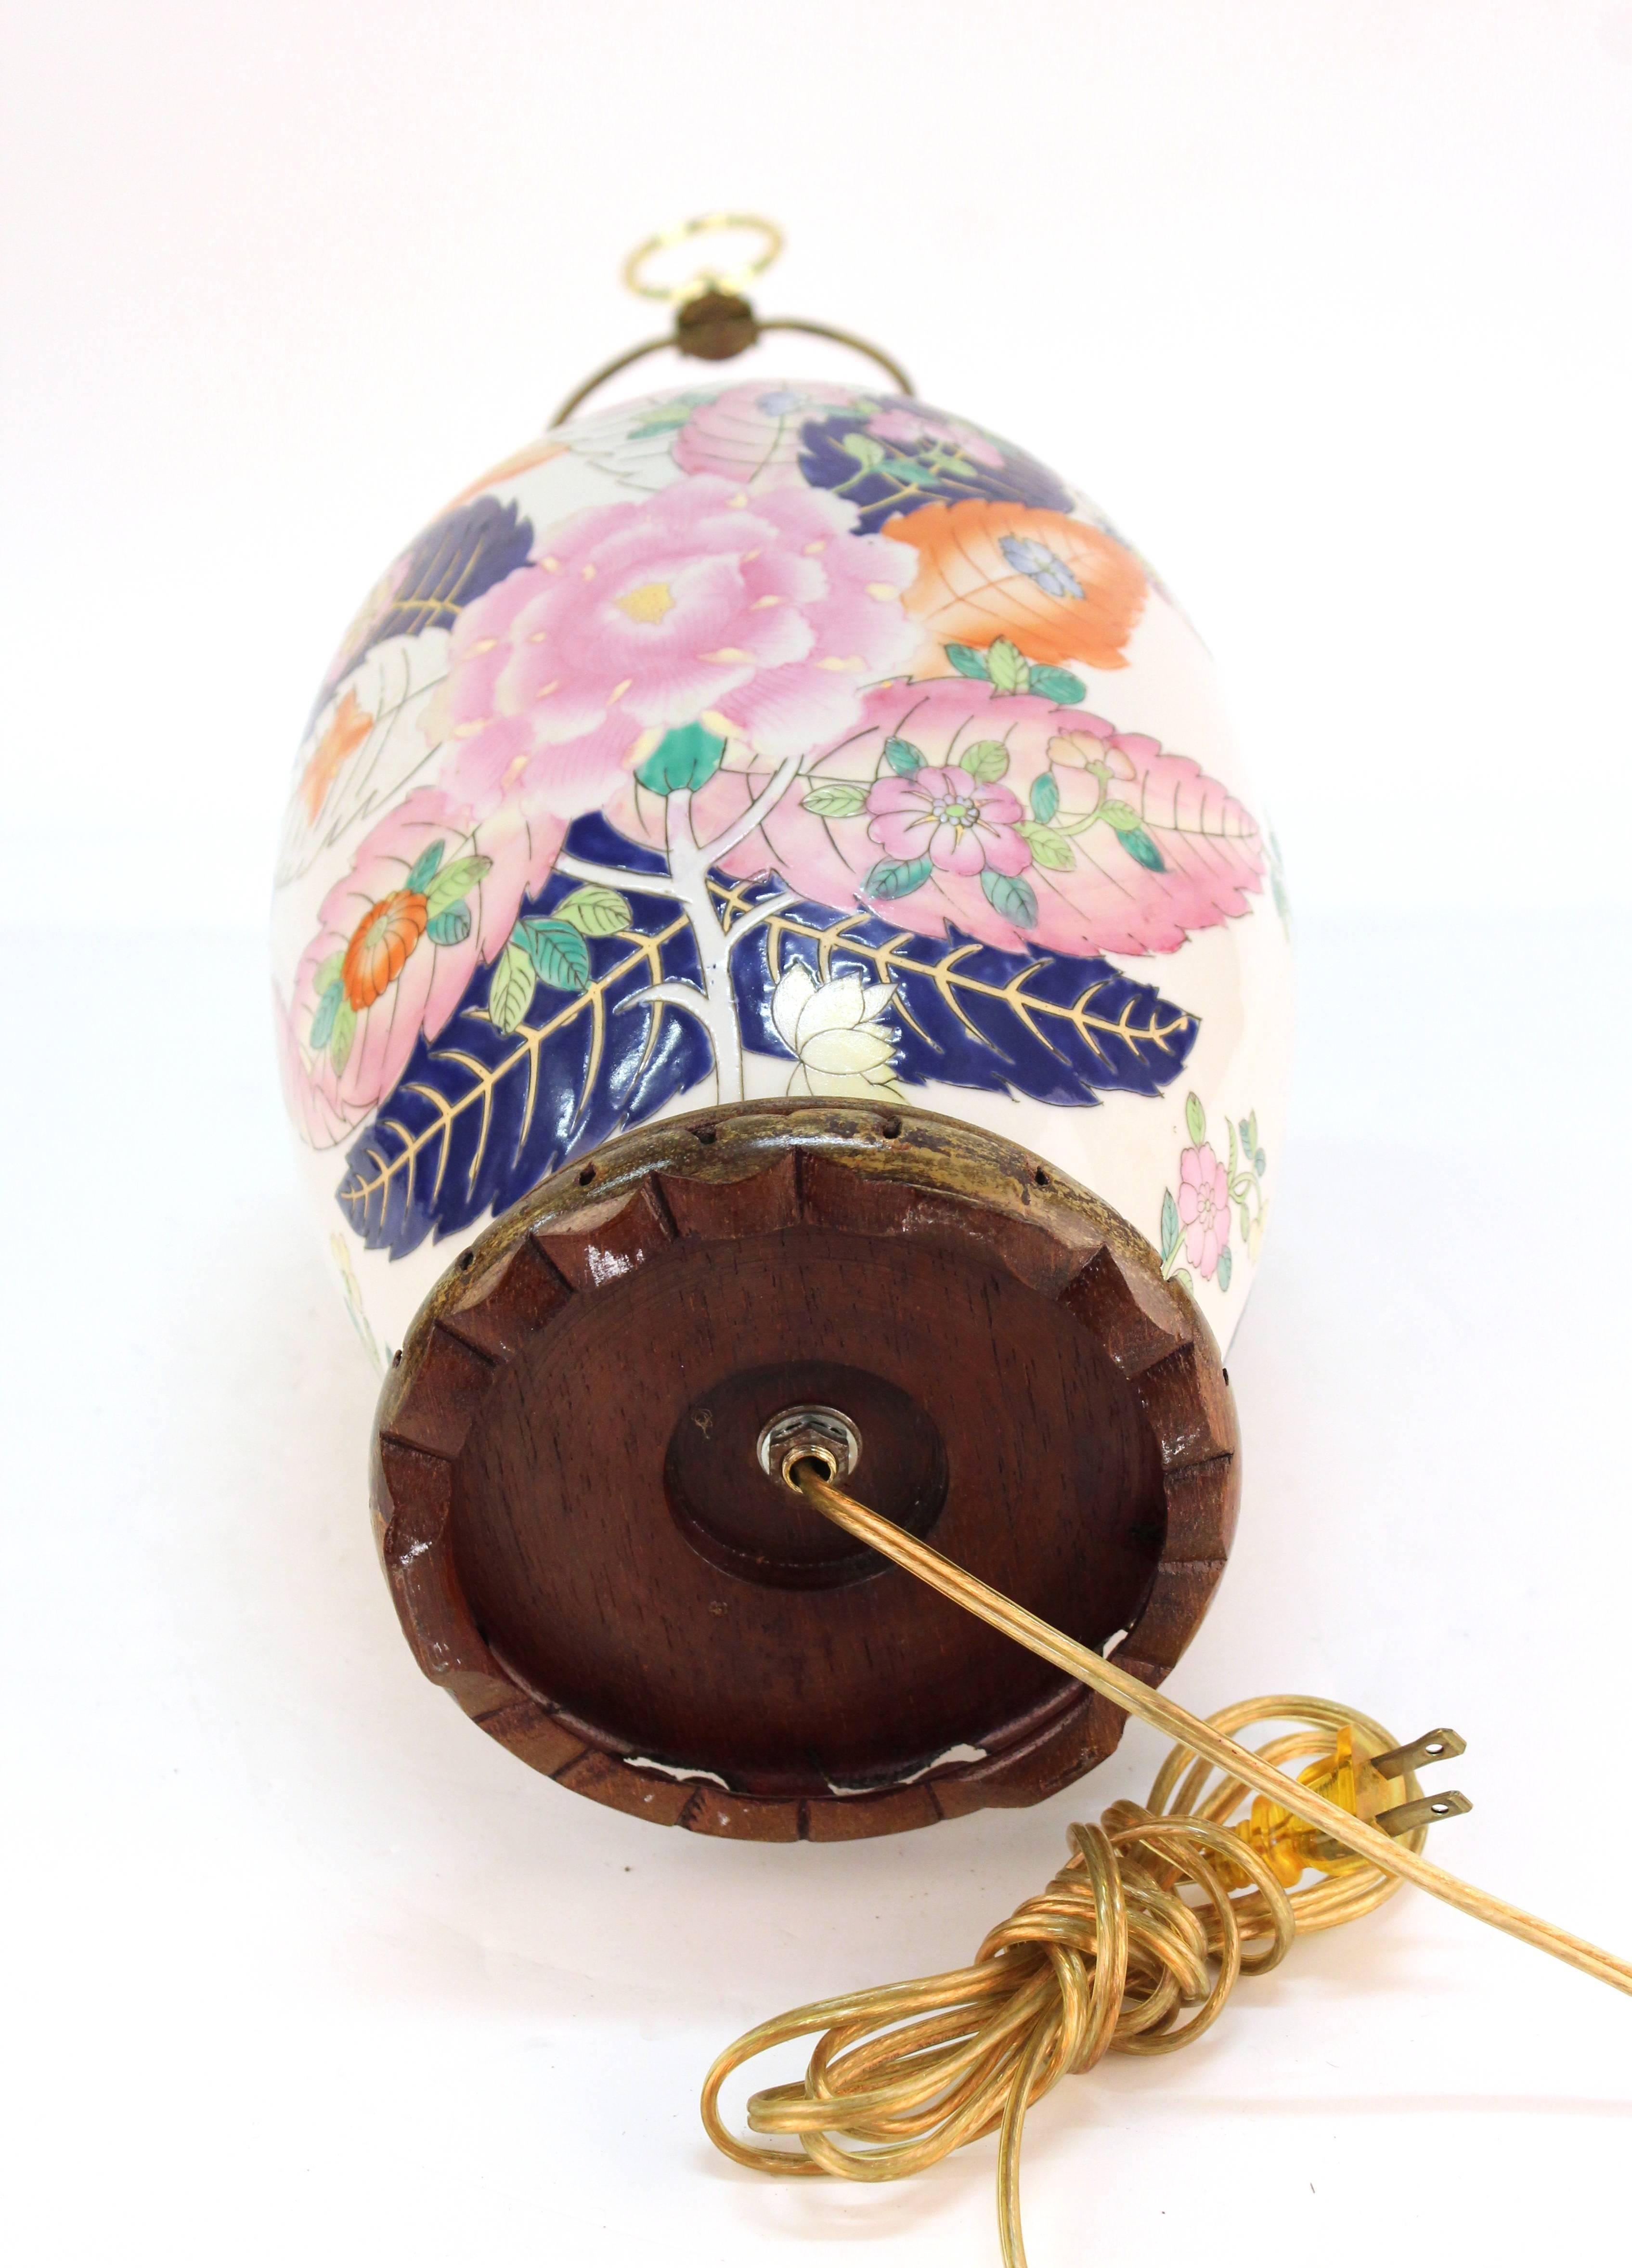 20th Century Chinese Porcelain Jar Table Lamp with Tobacco Leaf Motif